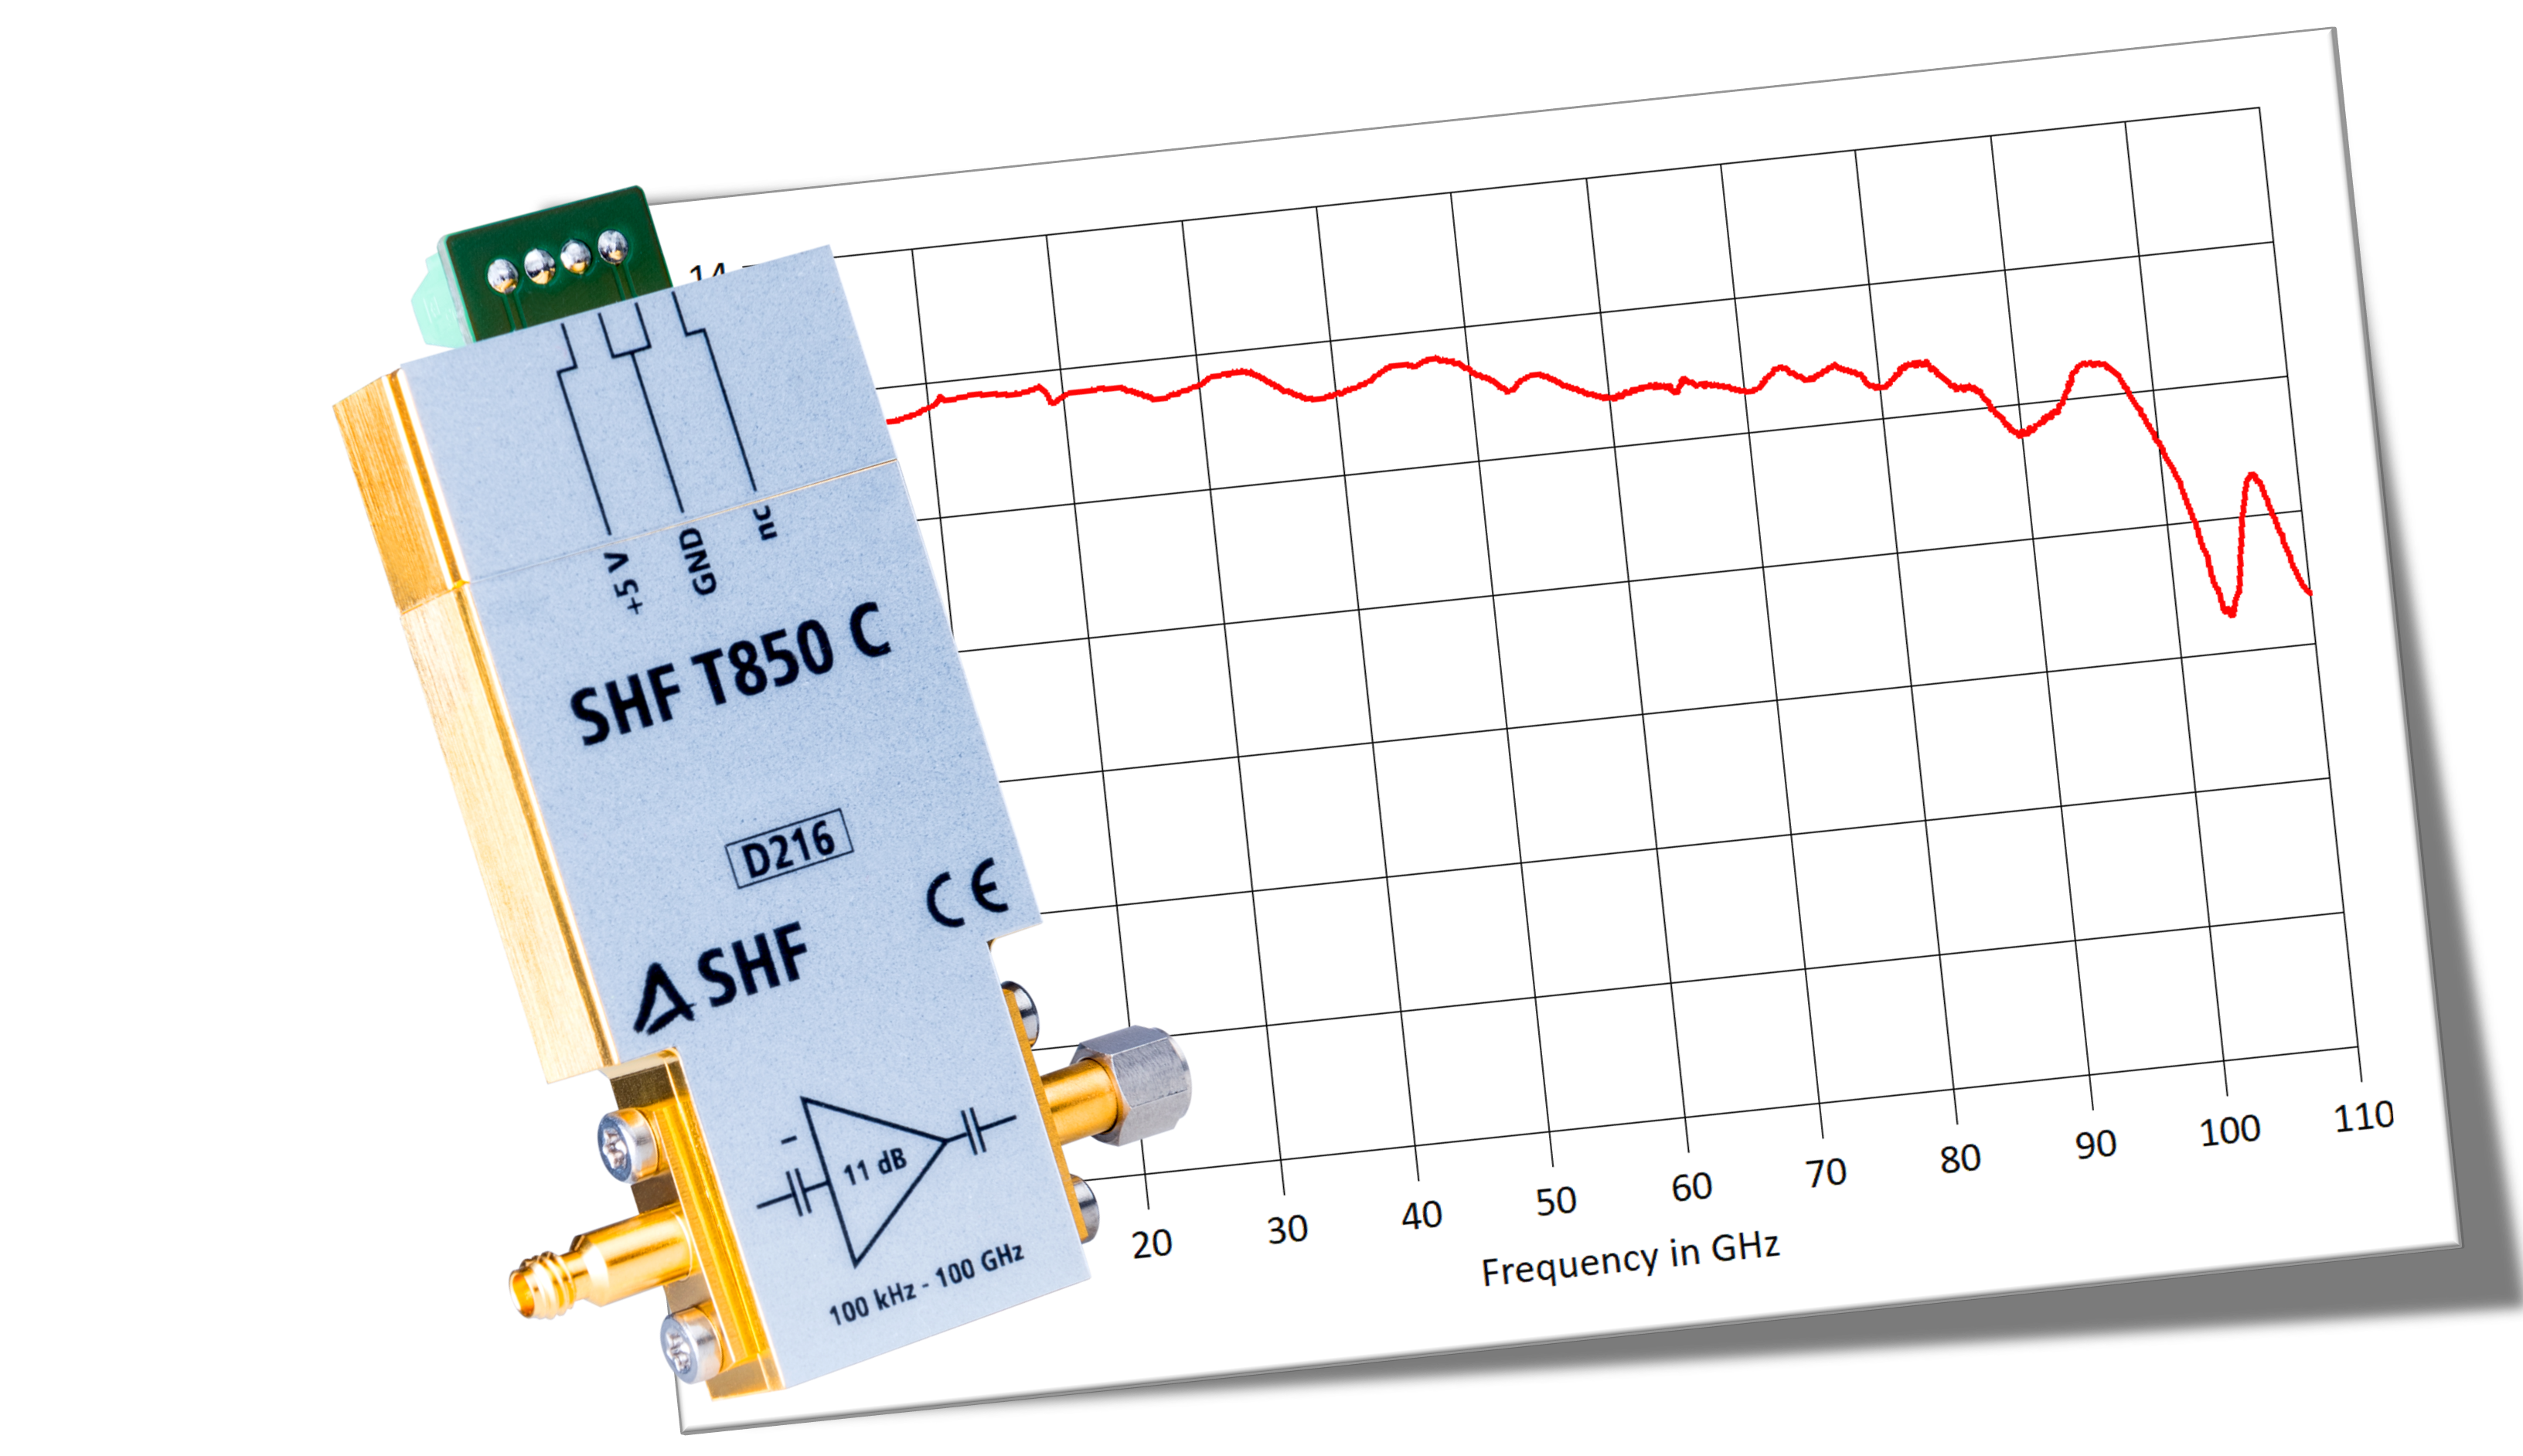 SHF T850 C with Frequency Response